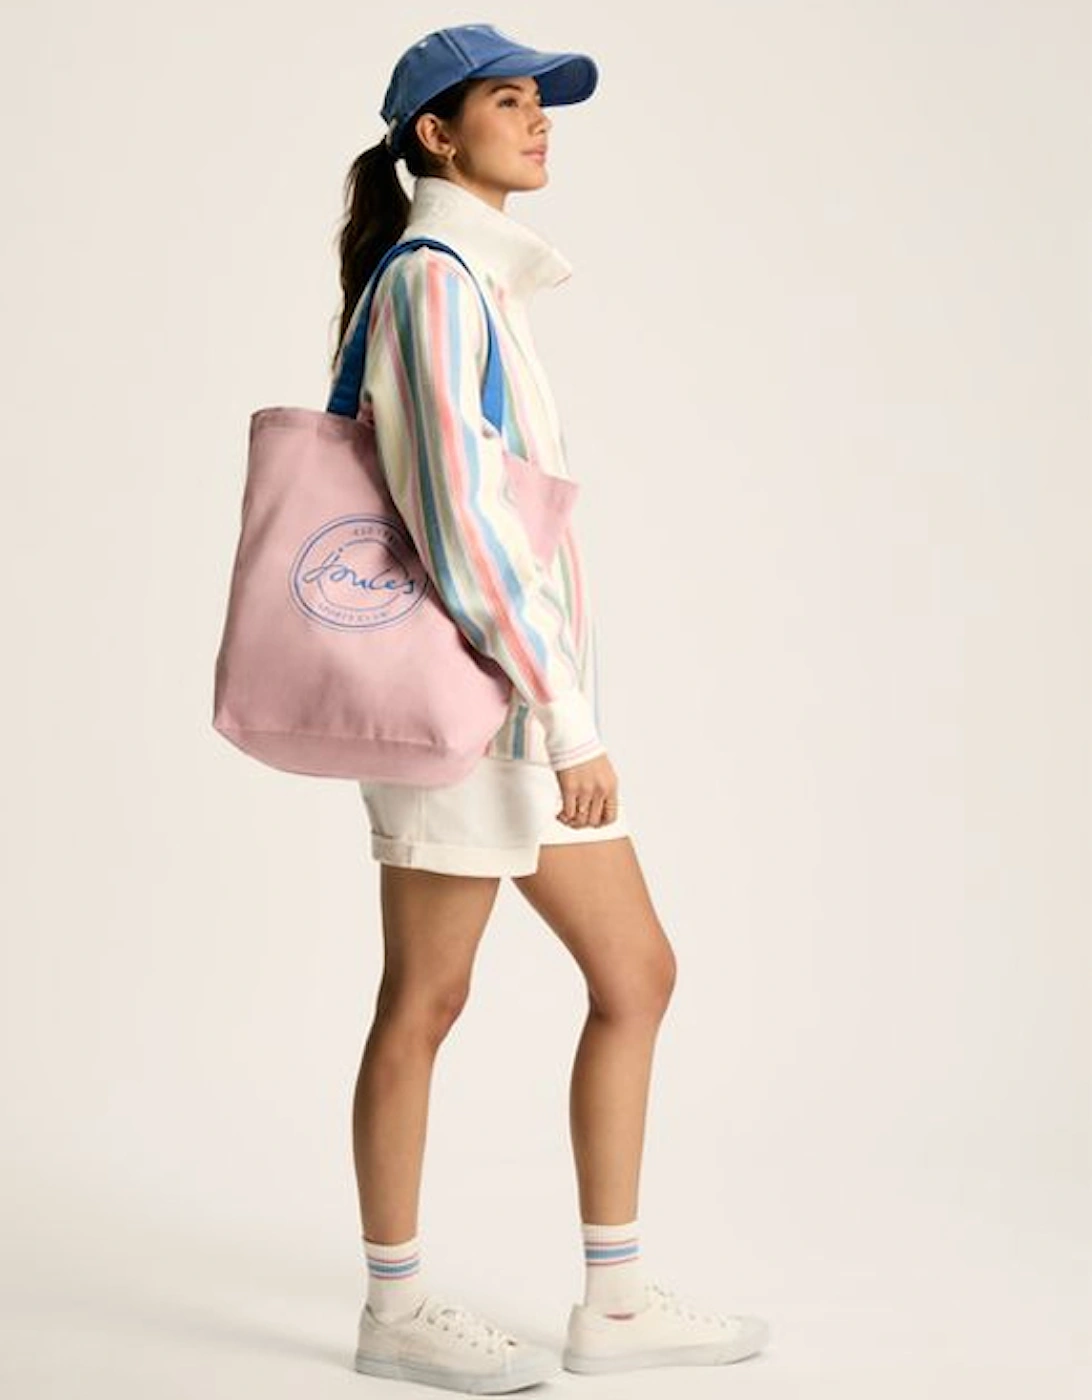 Courtside Bag Pink -One Size